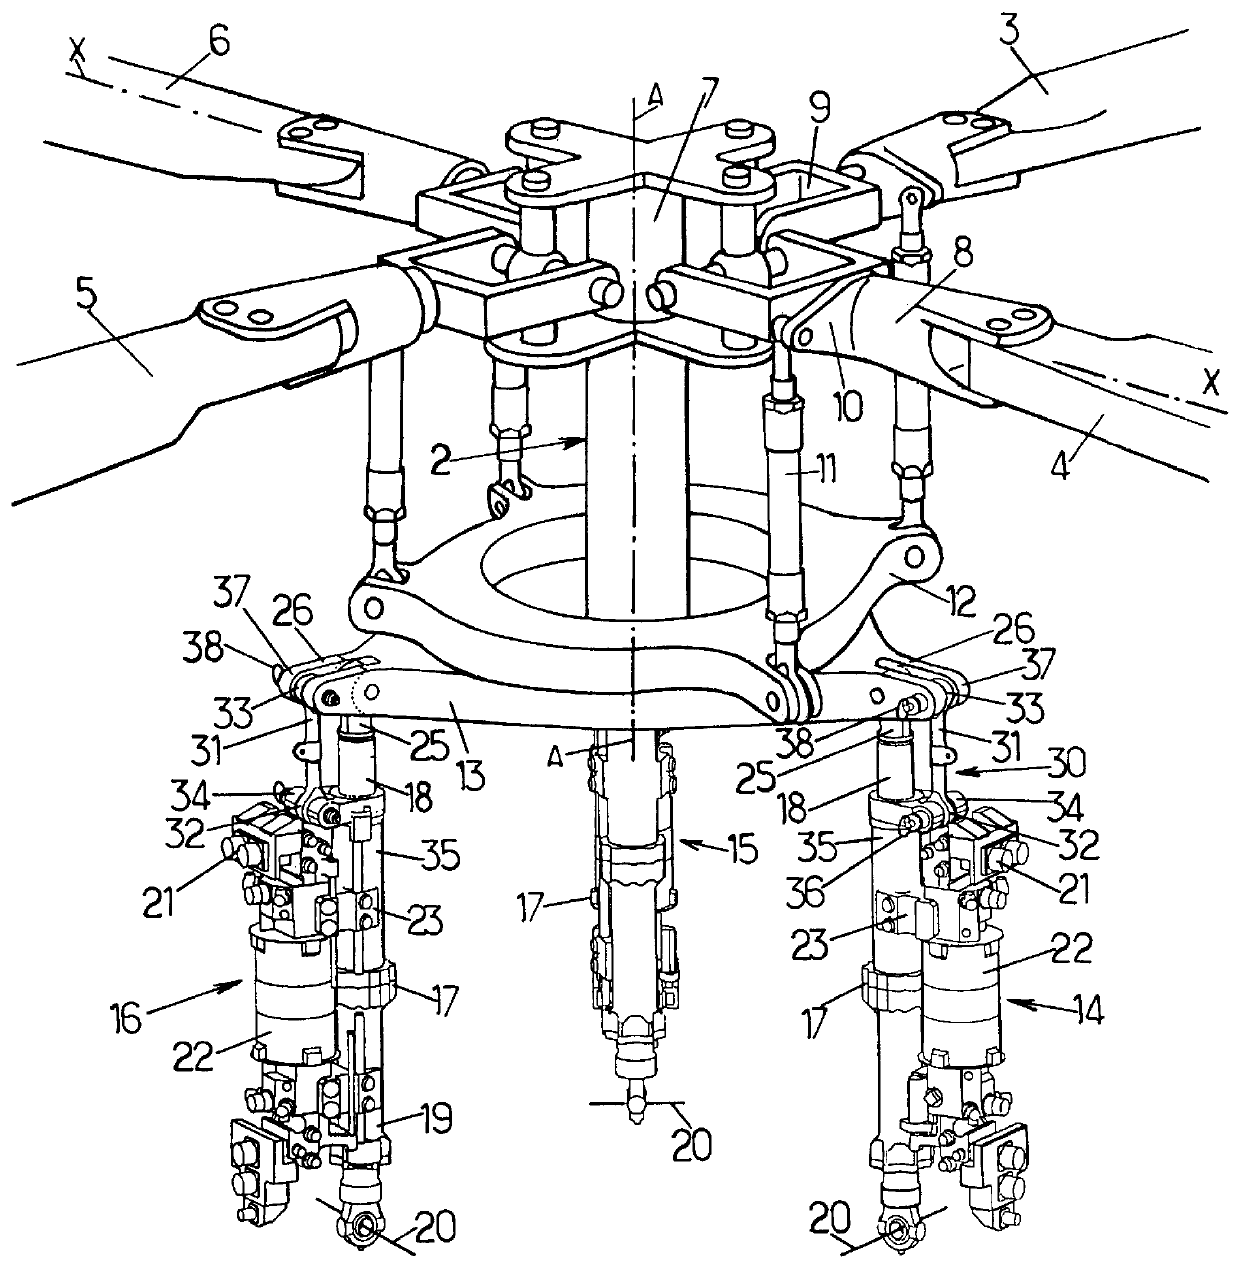 Blade pitch locking device for a main rotor of a rotary-wing aircraft